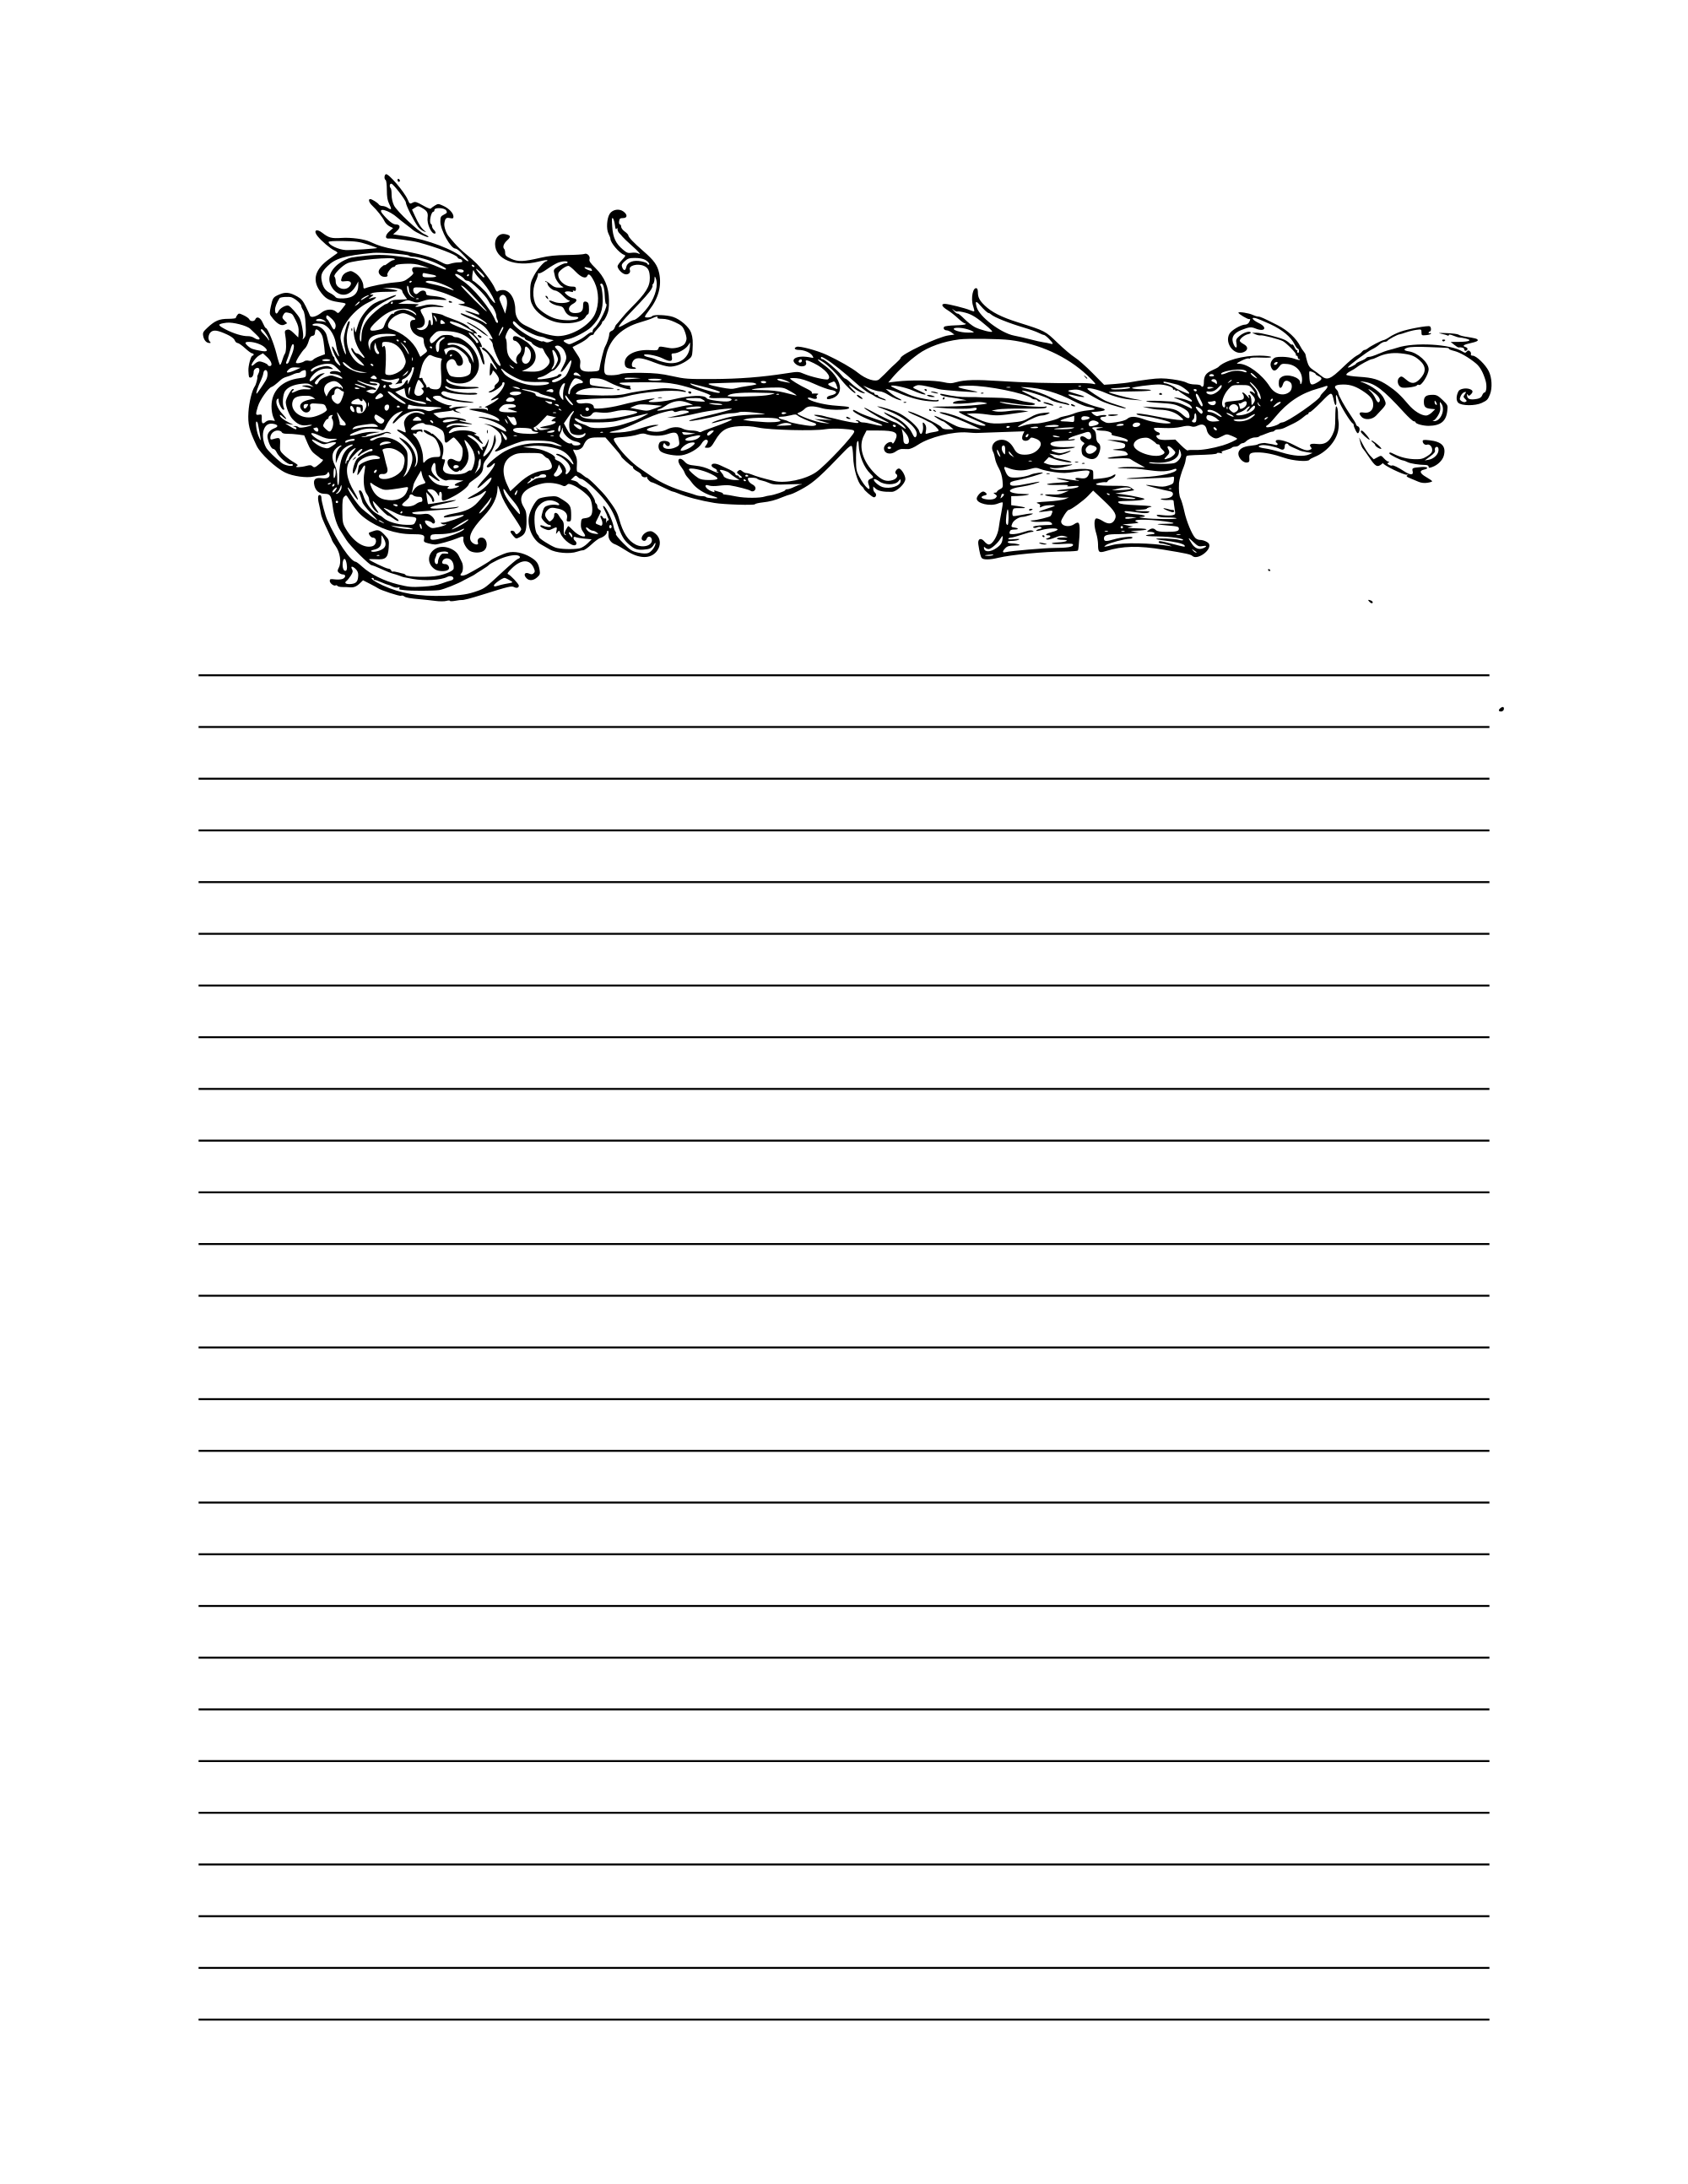 Book Of Shadows BOS Lined Page Printable Writing Paper Printable 